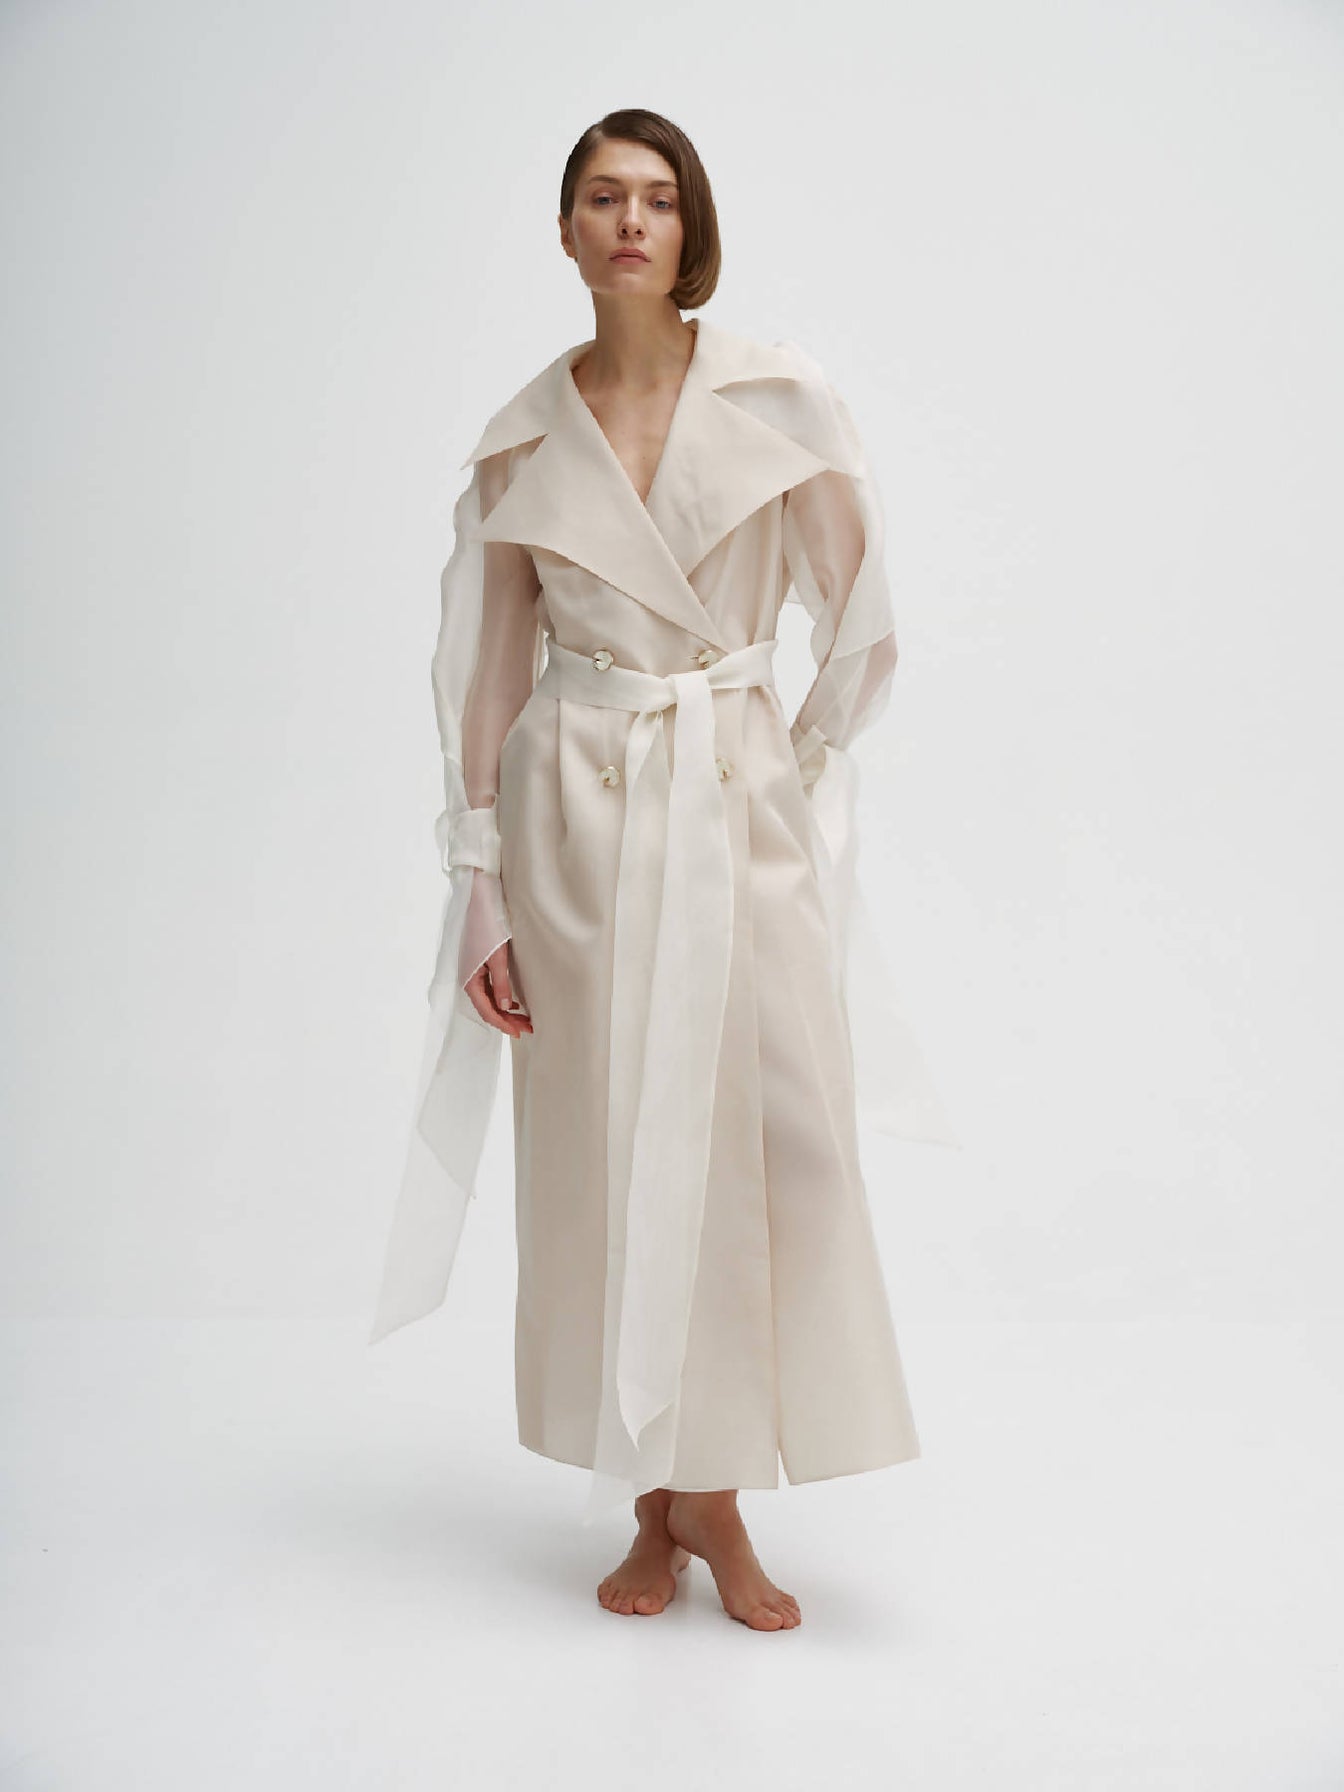 10 top picks from NJAL Brands for creative and sustainable fashion